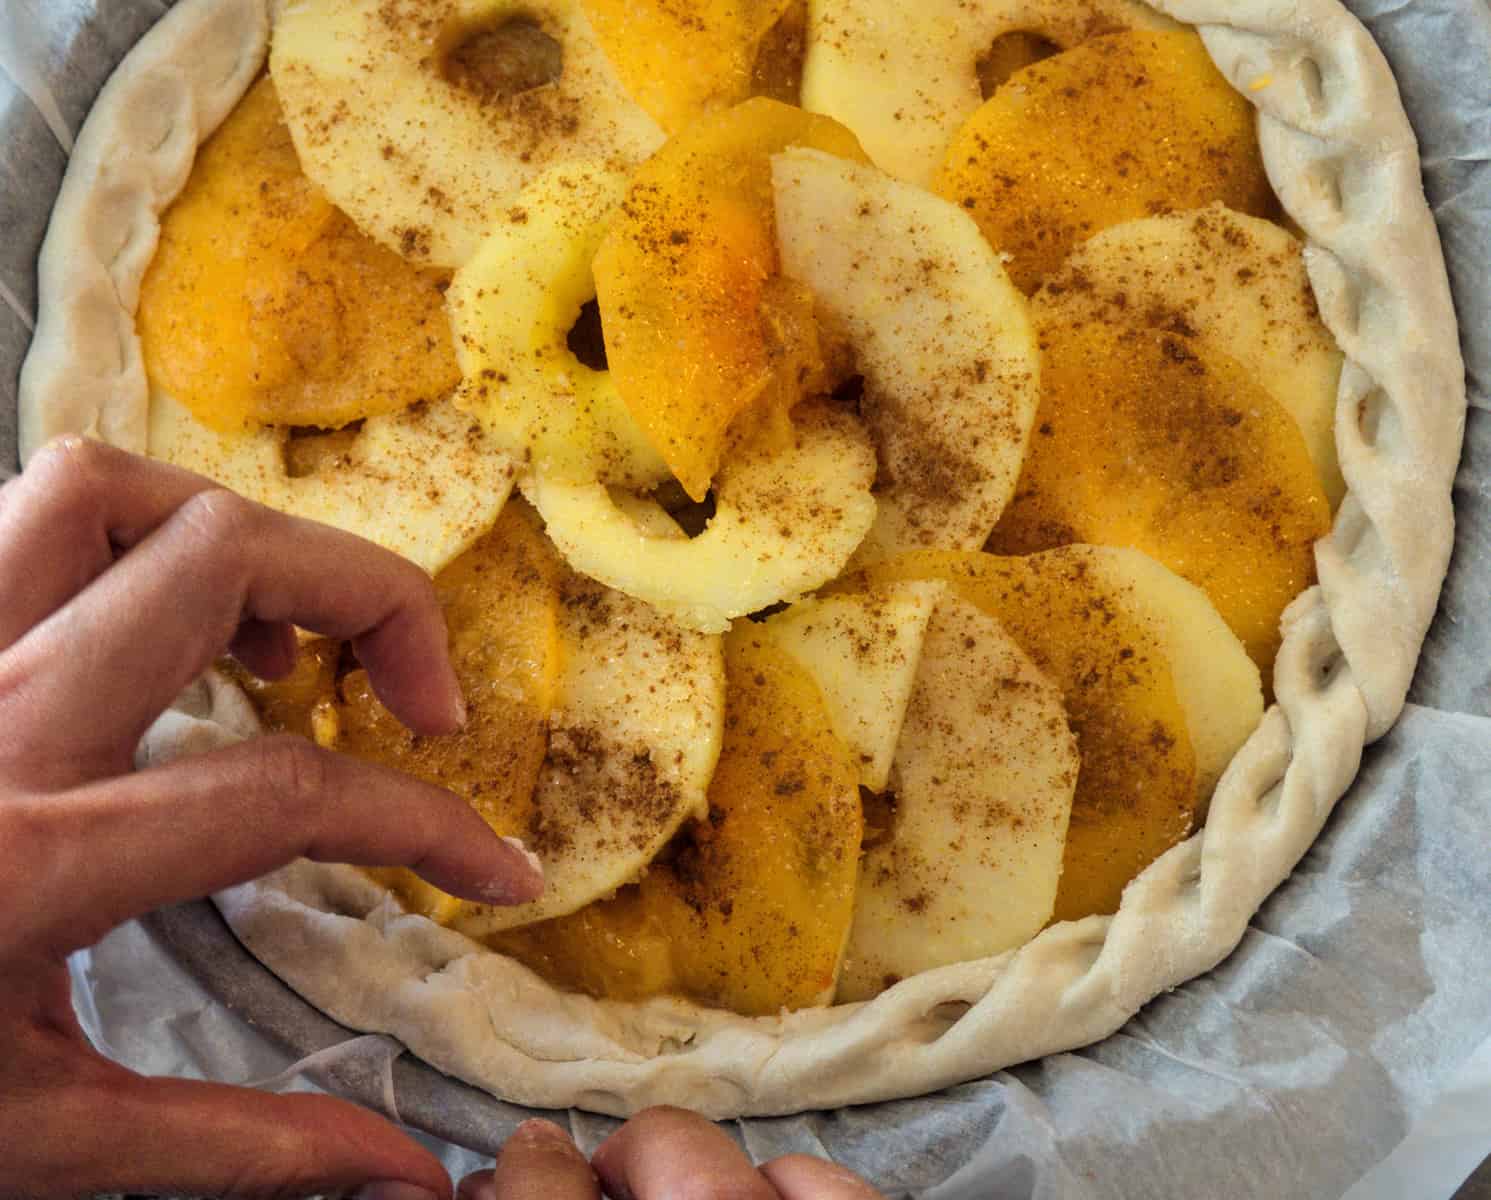 Preparation of apple persimmon pie at home. Homemade baking pastries with apples and persimmons